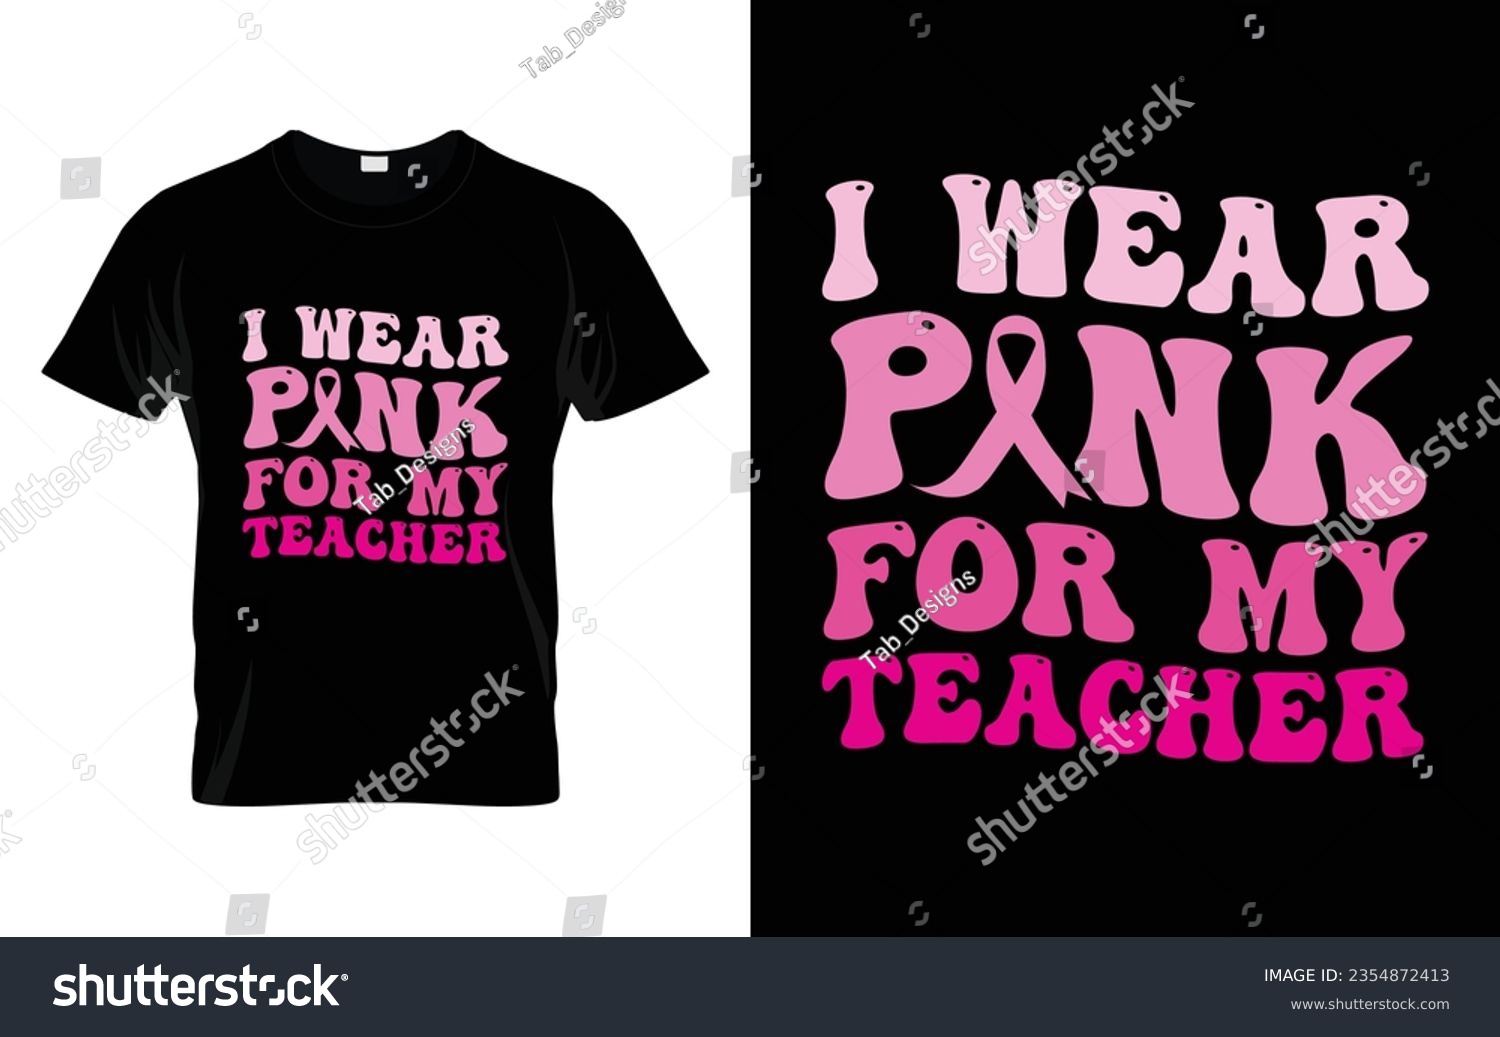 SVG of I wear pink for my Teacher pink ribbon Groovy Breast Cancer Awareness Month T shirt Design || Breast Cancer Awareness Groovy t shirt design. svg